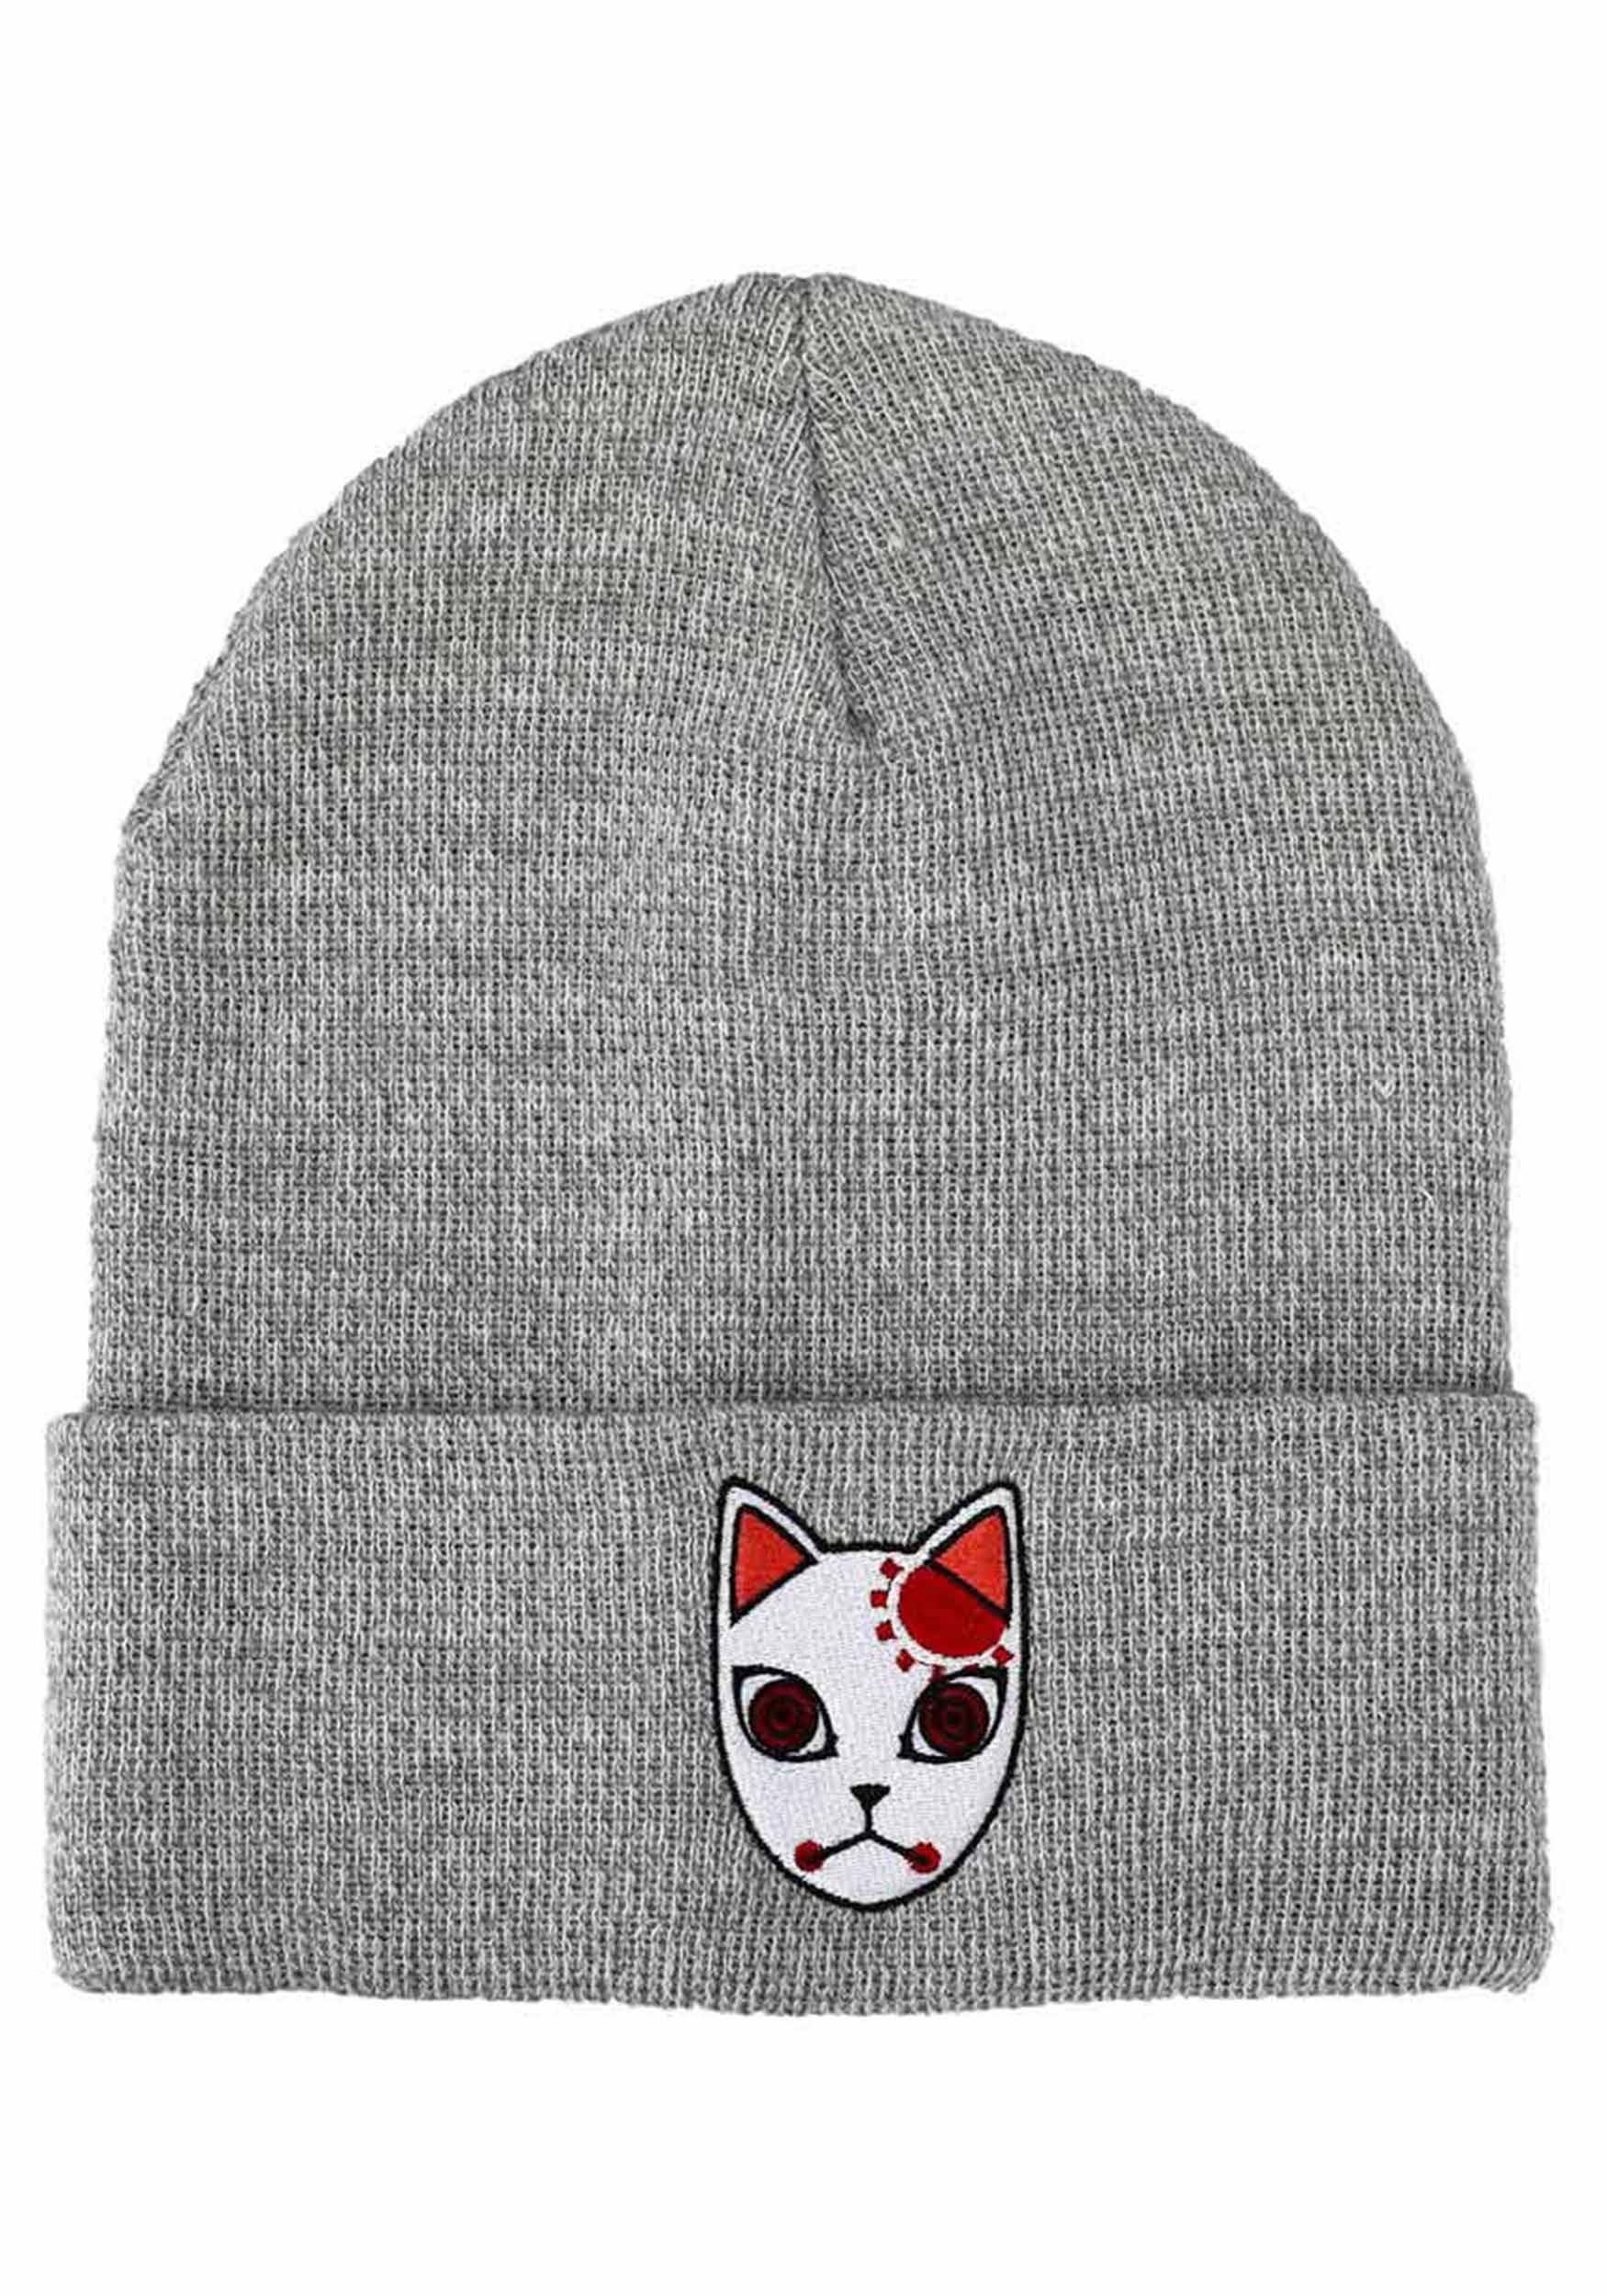 Demon Slayer Fox Mask Embroidered Cuff Beanie for Adults